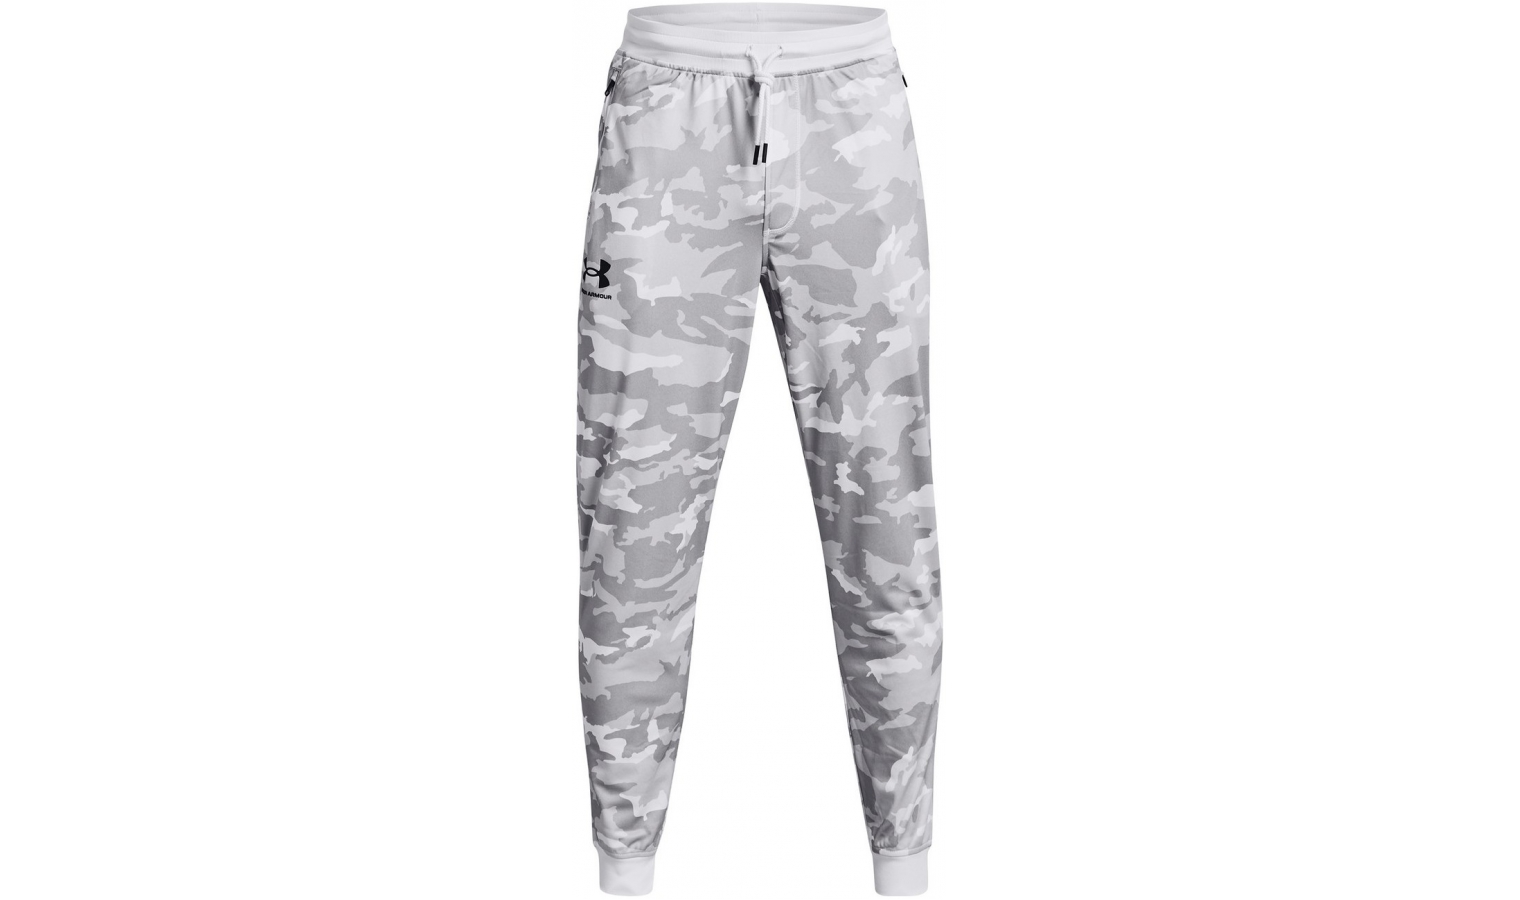 Under Armour Mens UA Sportstyle Tricot Joggers Sweatpants 1376978 - New 